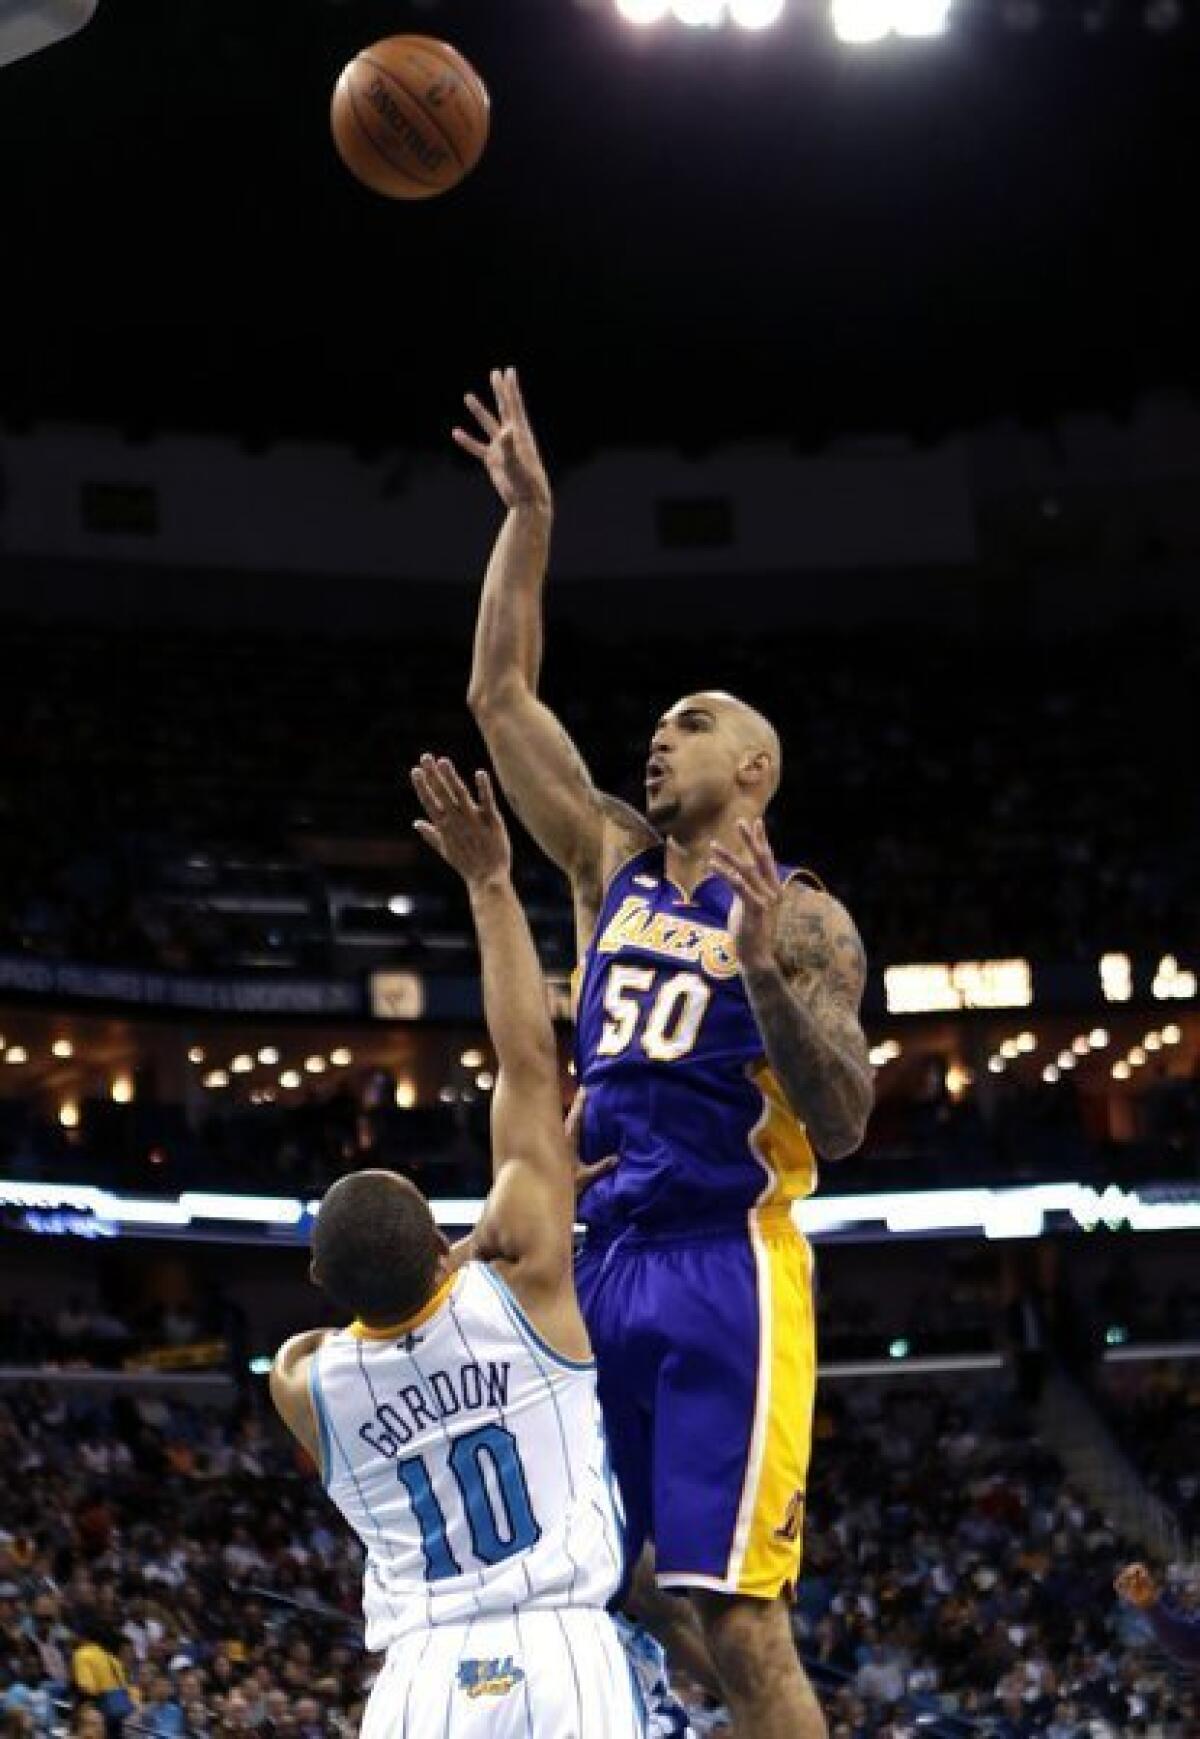 The Lakers recently re-signed 7-foot center Robert Sacre to a multiyear contract.